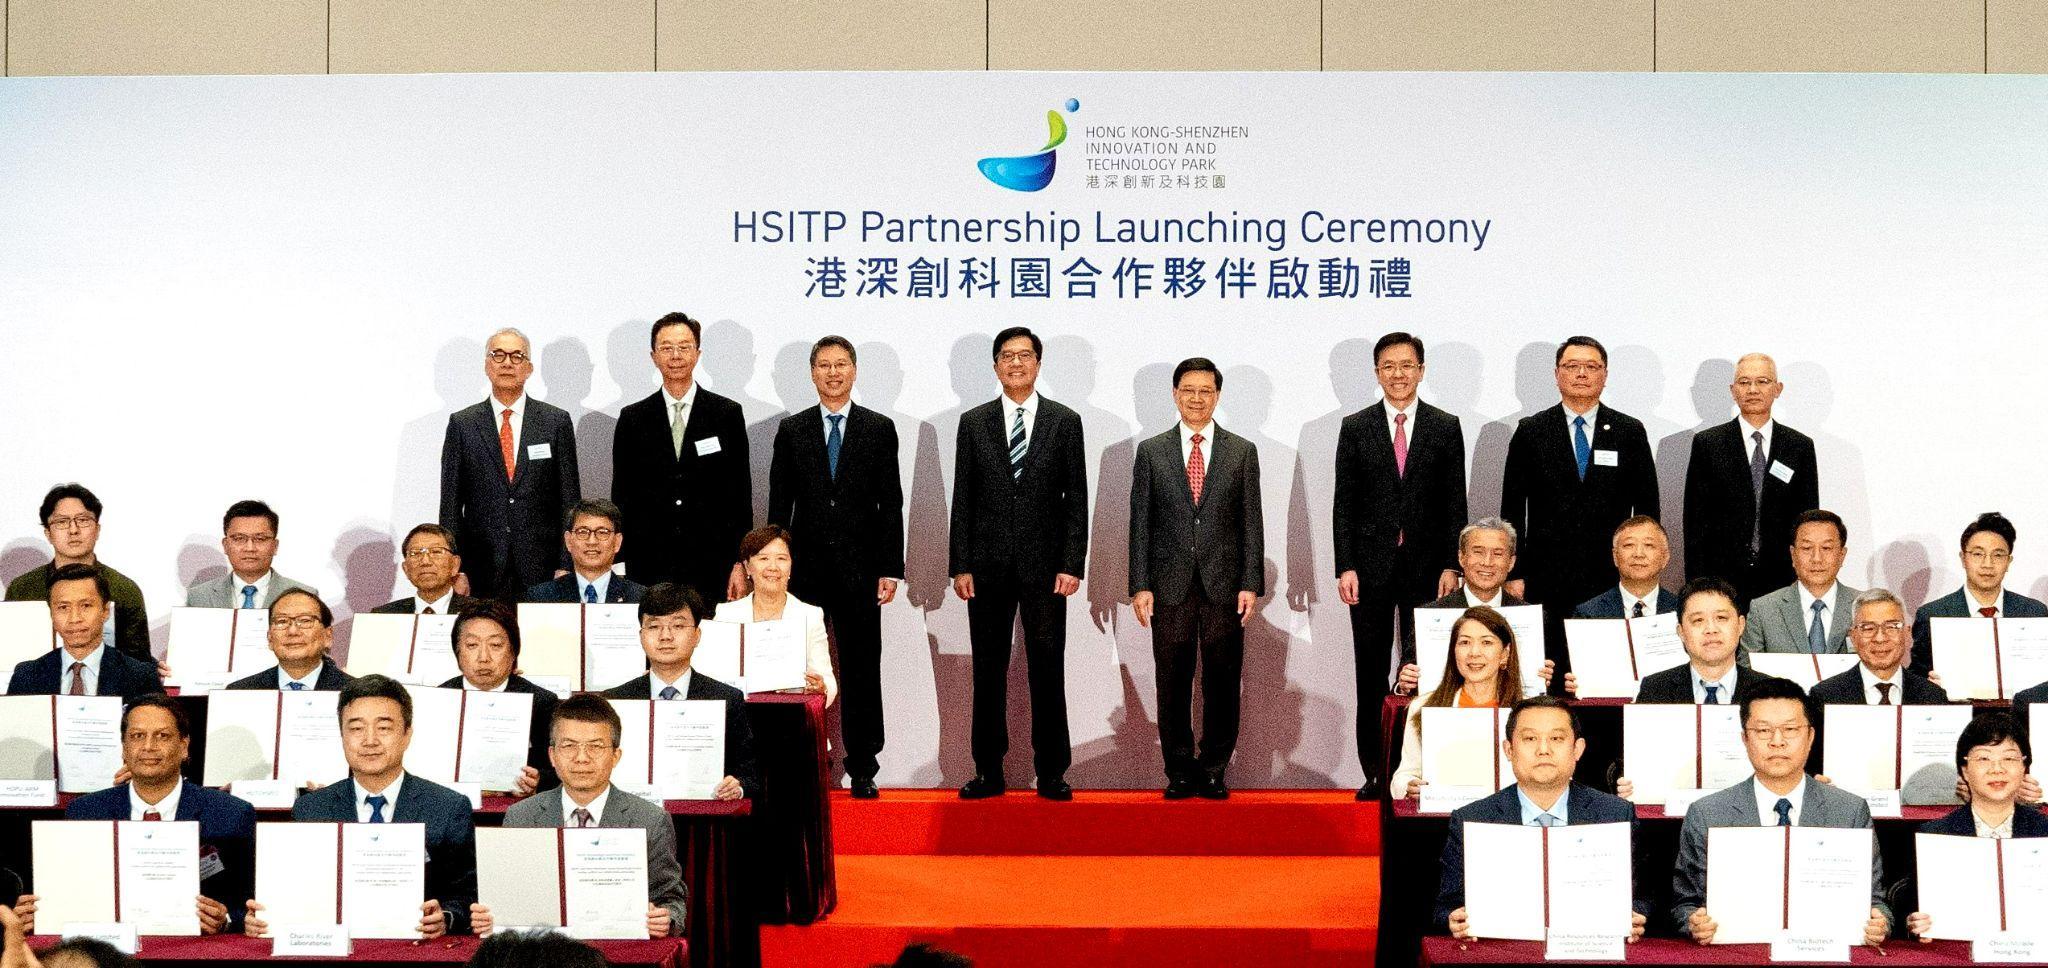 Hong Kong's Chief Executive, The Honourable John Lee, witnessed the Partnership Launching Ceremony, with Chief of Staff Andre Kwok, representative of Tsangs Group signatories.